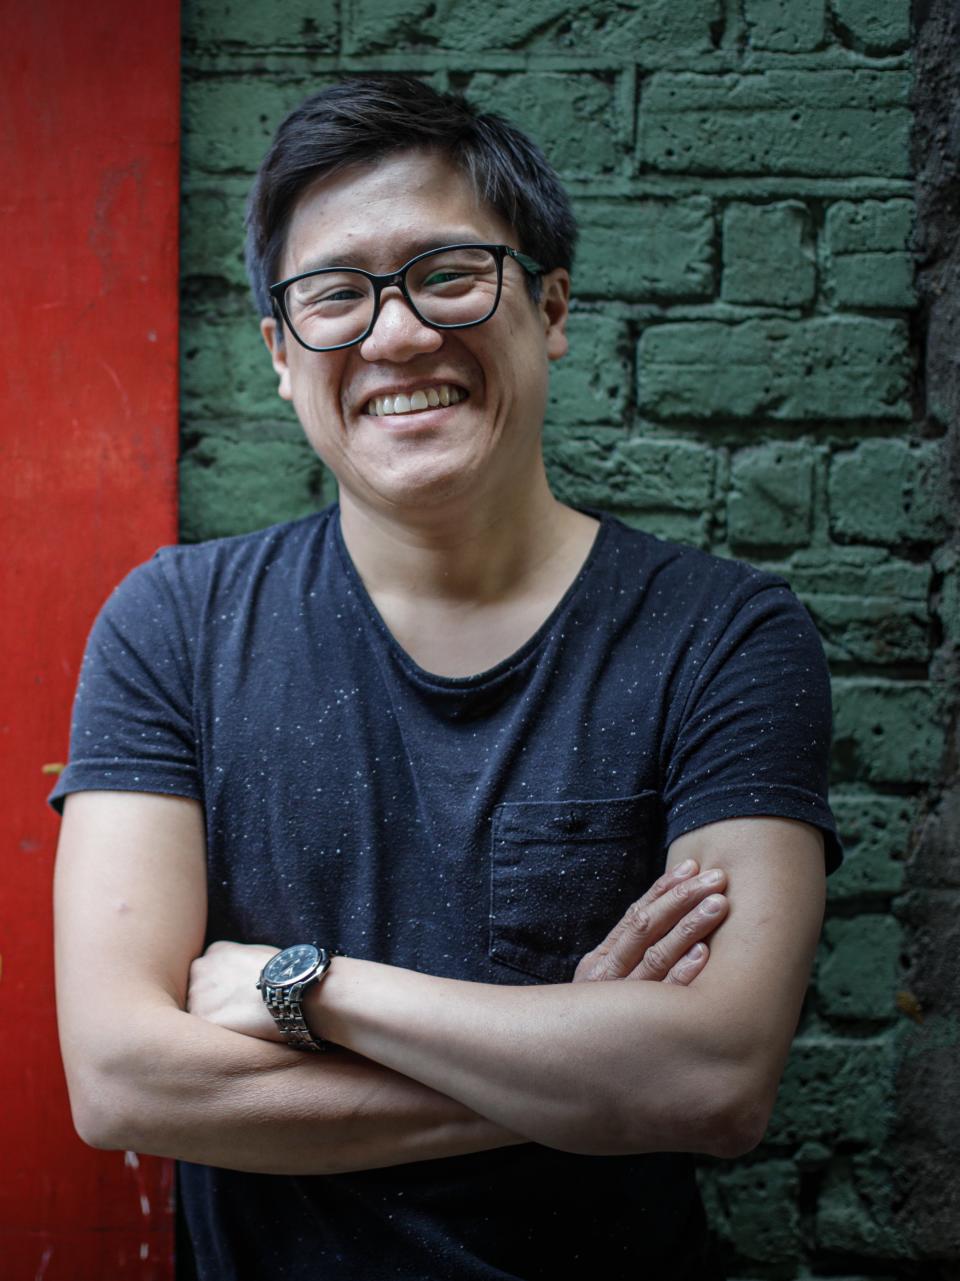 Jeremy Pang founded the School of Wok, an award-winning Asian cookery school, in 2009 (Jeremy Pang)